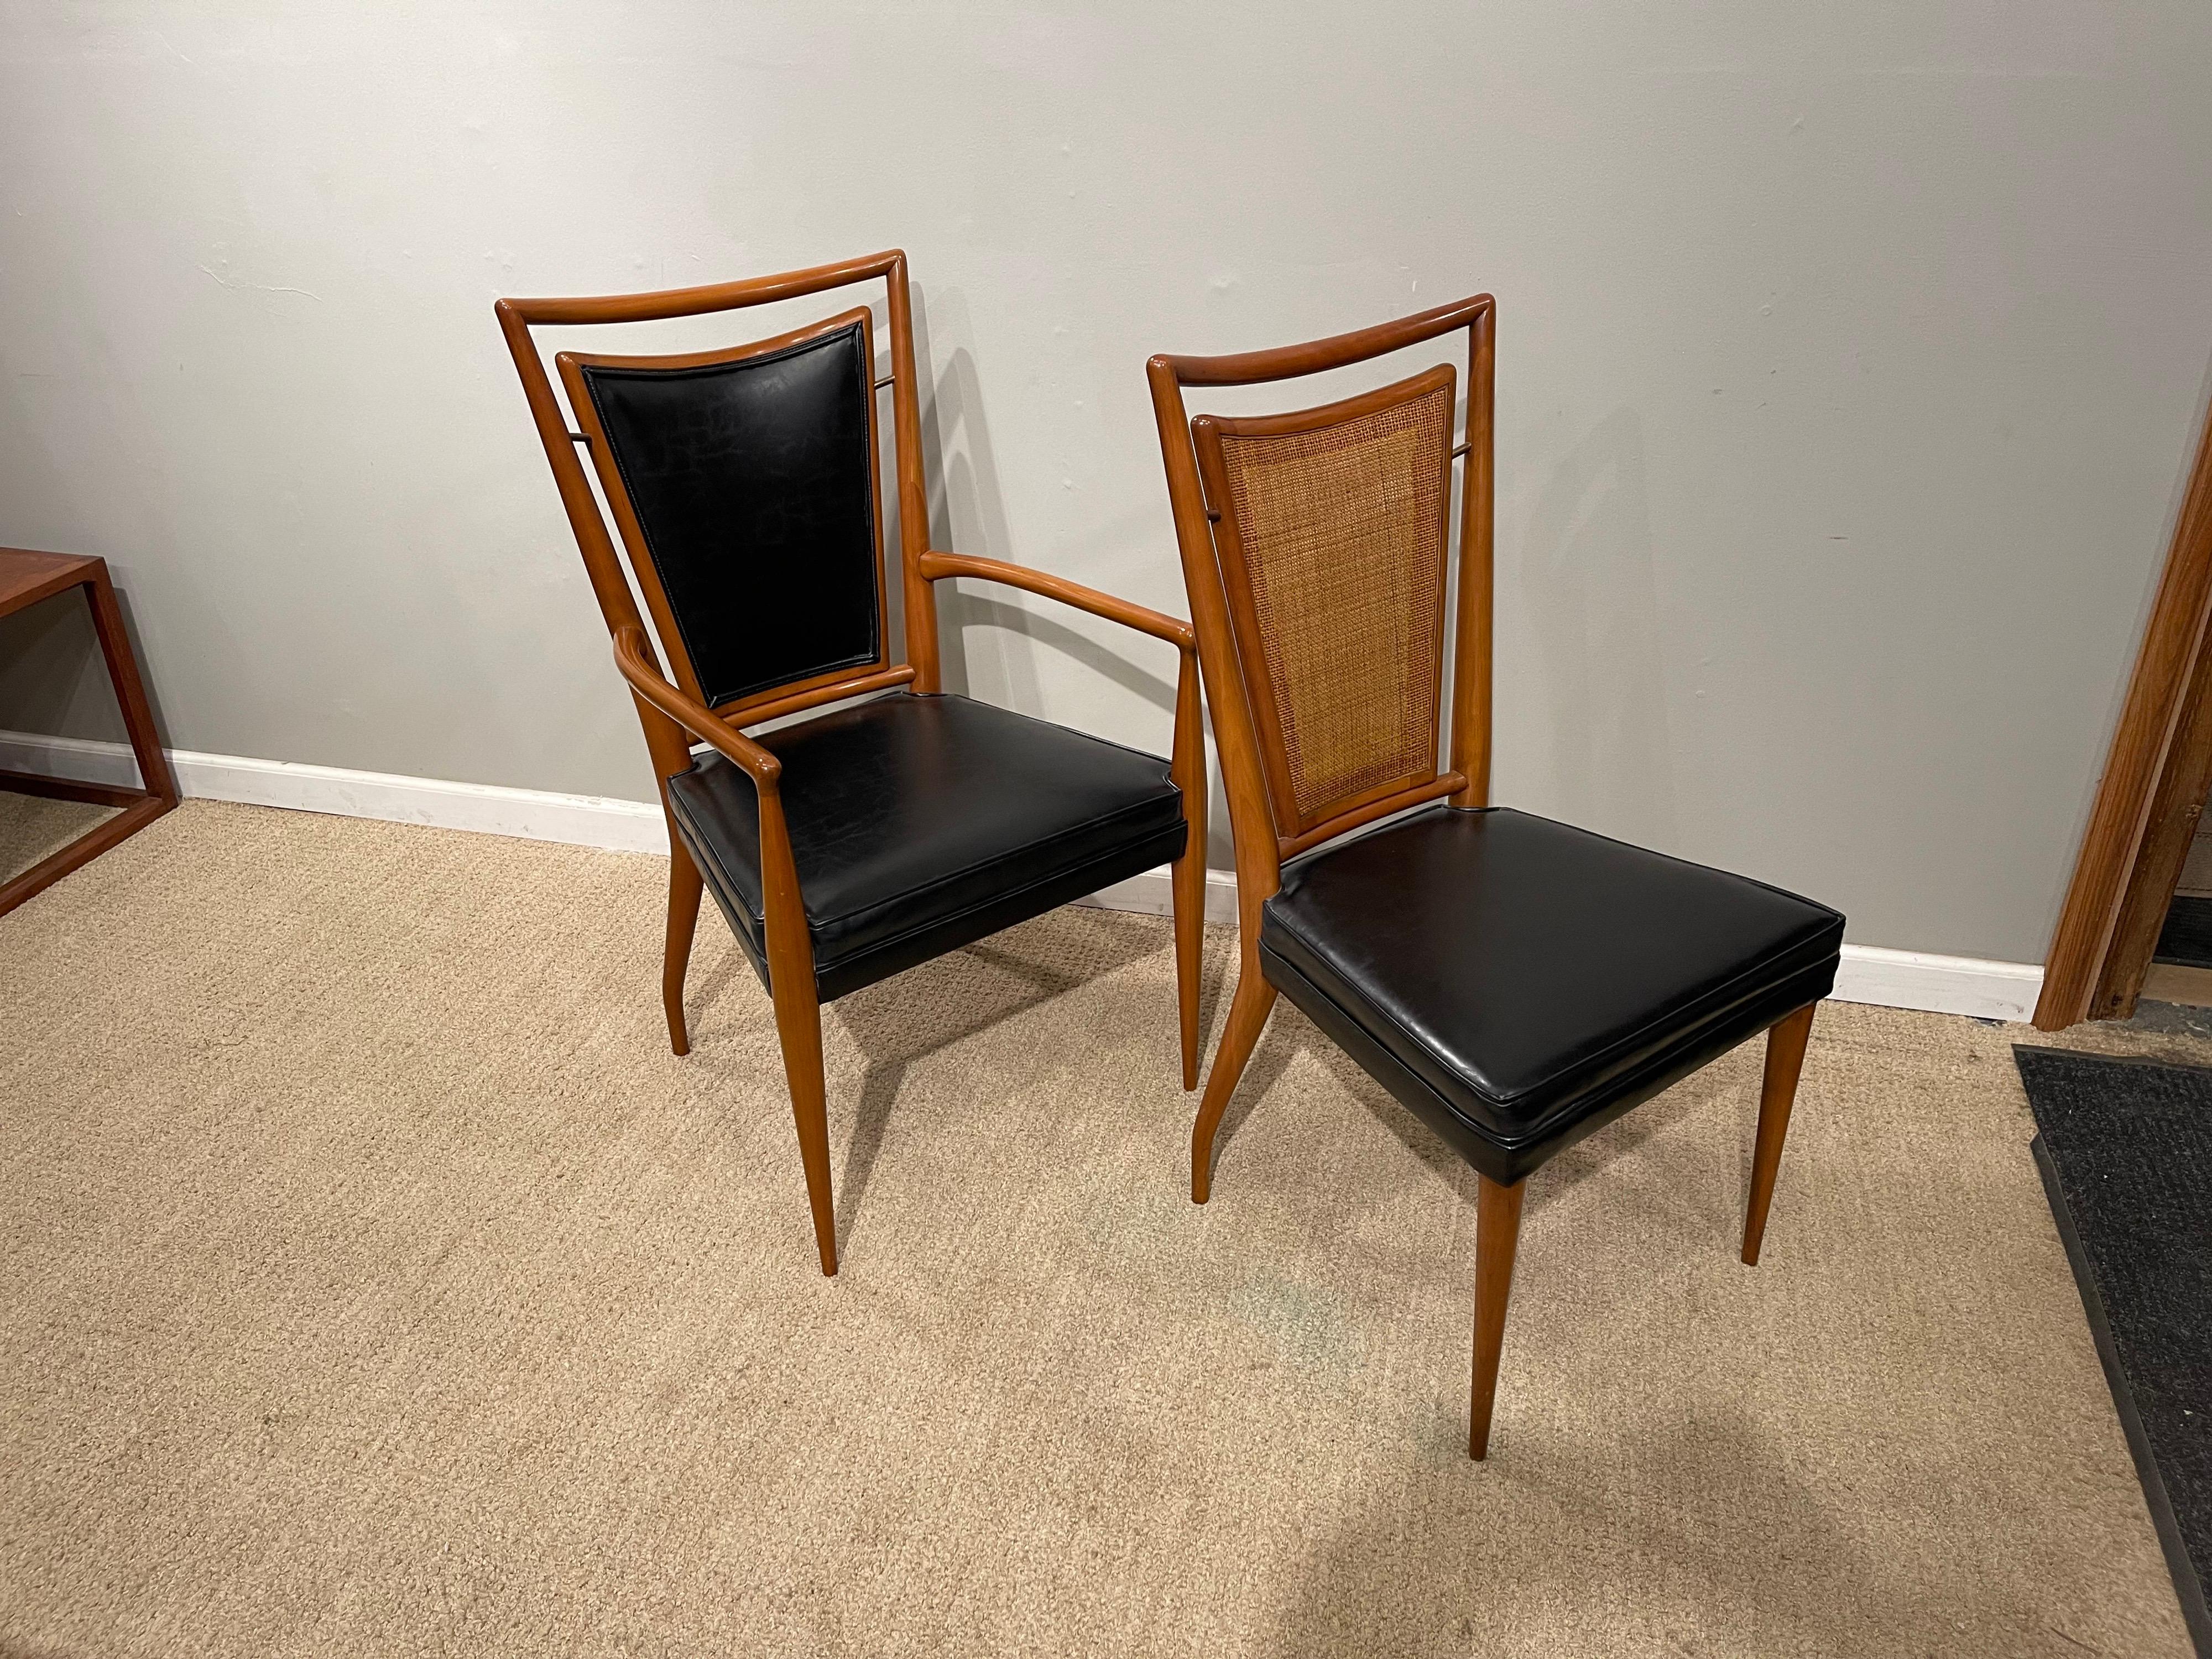 Polished Set of Six Mid-Century Modern Dining Chairs, 4 Side-Chairs  & 2 Arm-Chairs For Sale